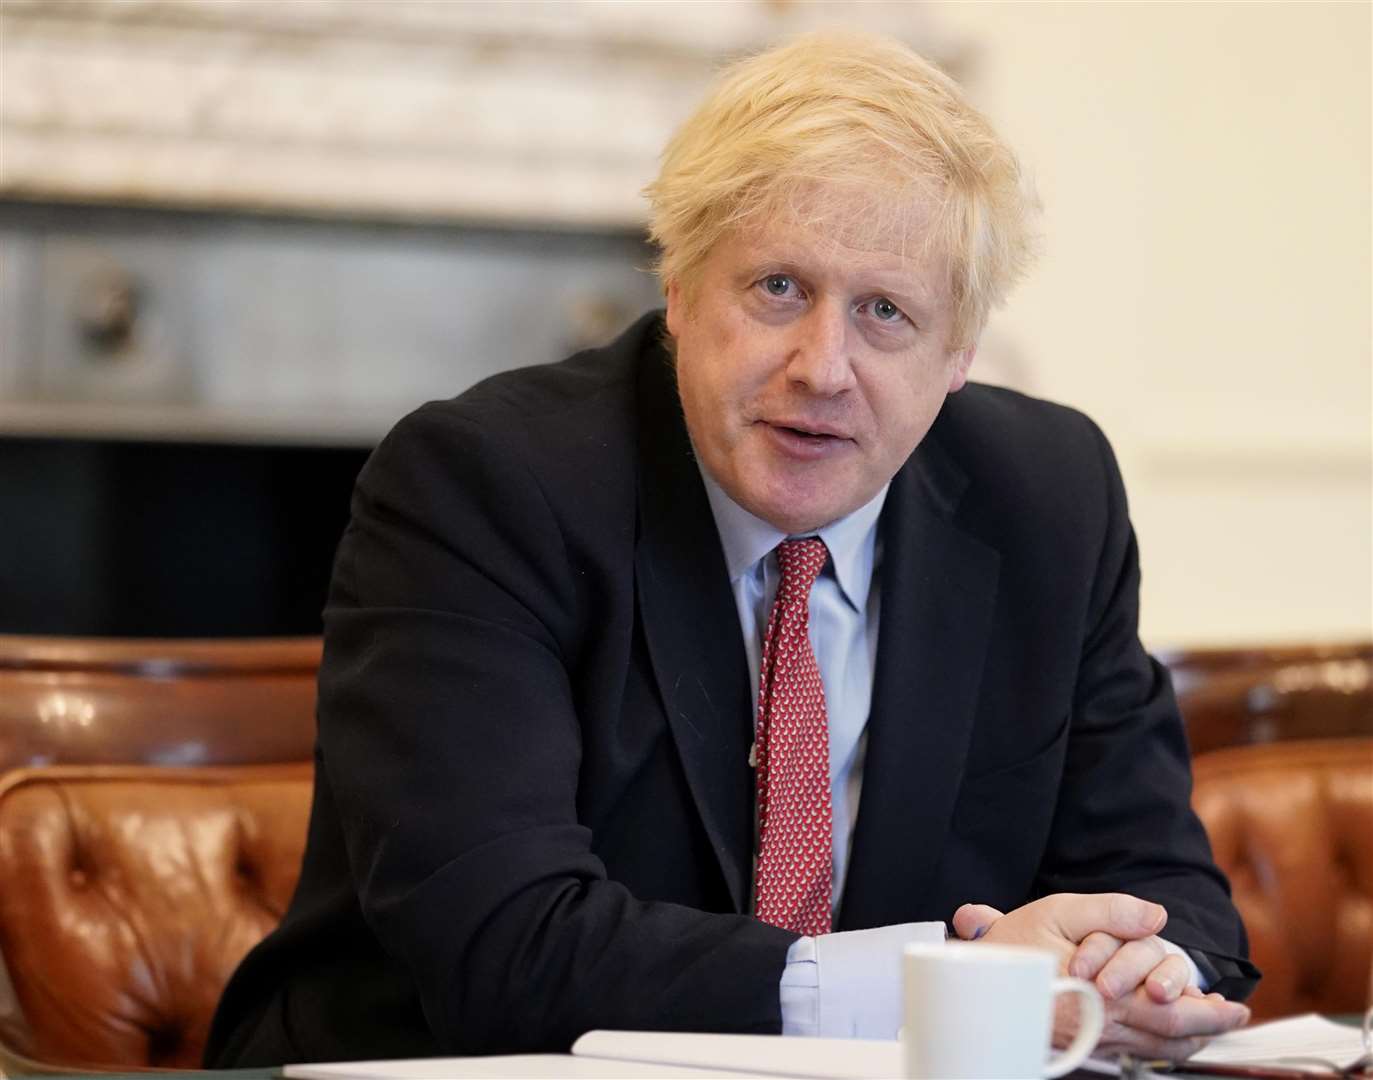 Prime Minister Boris Johnson chairing a meeting in the cabinet room after returning from his coronavirus absence (Andrew Parsons/10 Downing Street/Crown Copyright/PA)